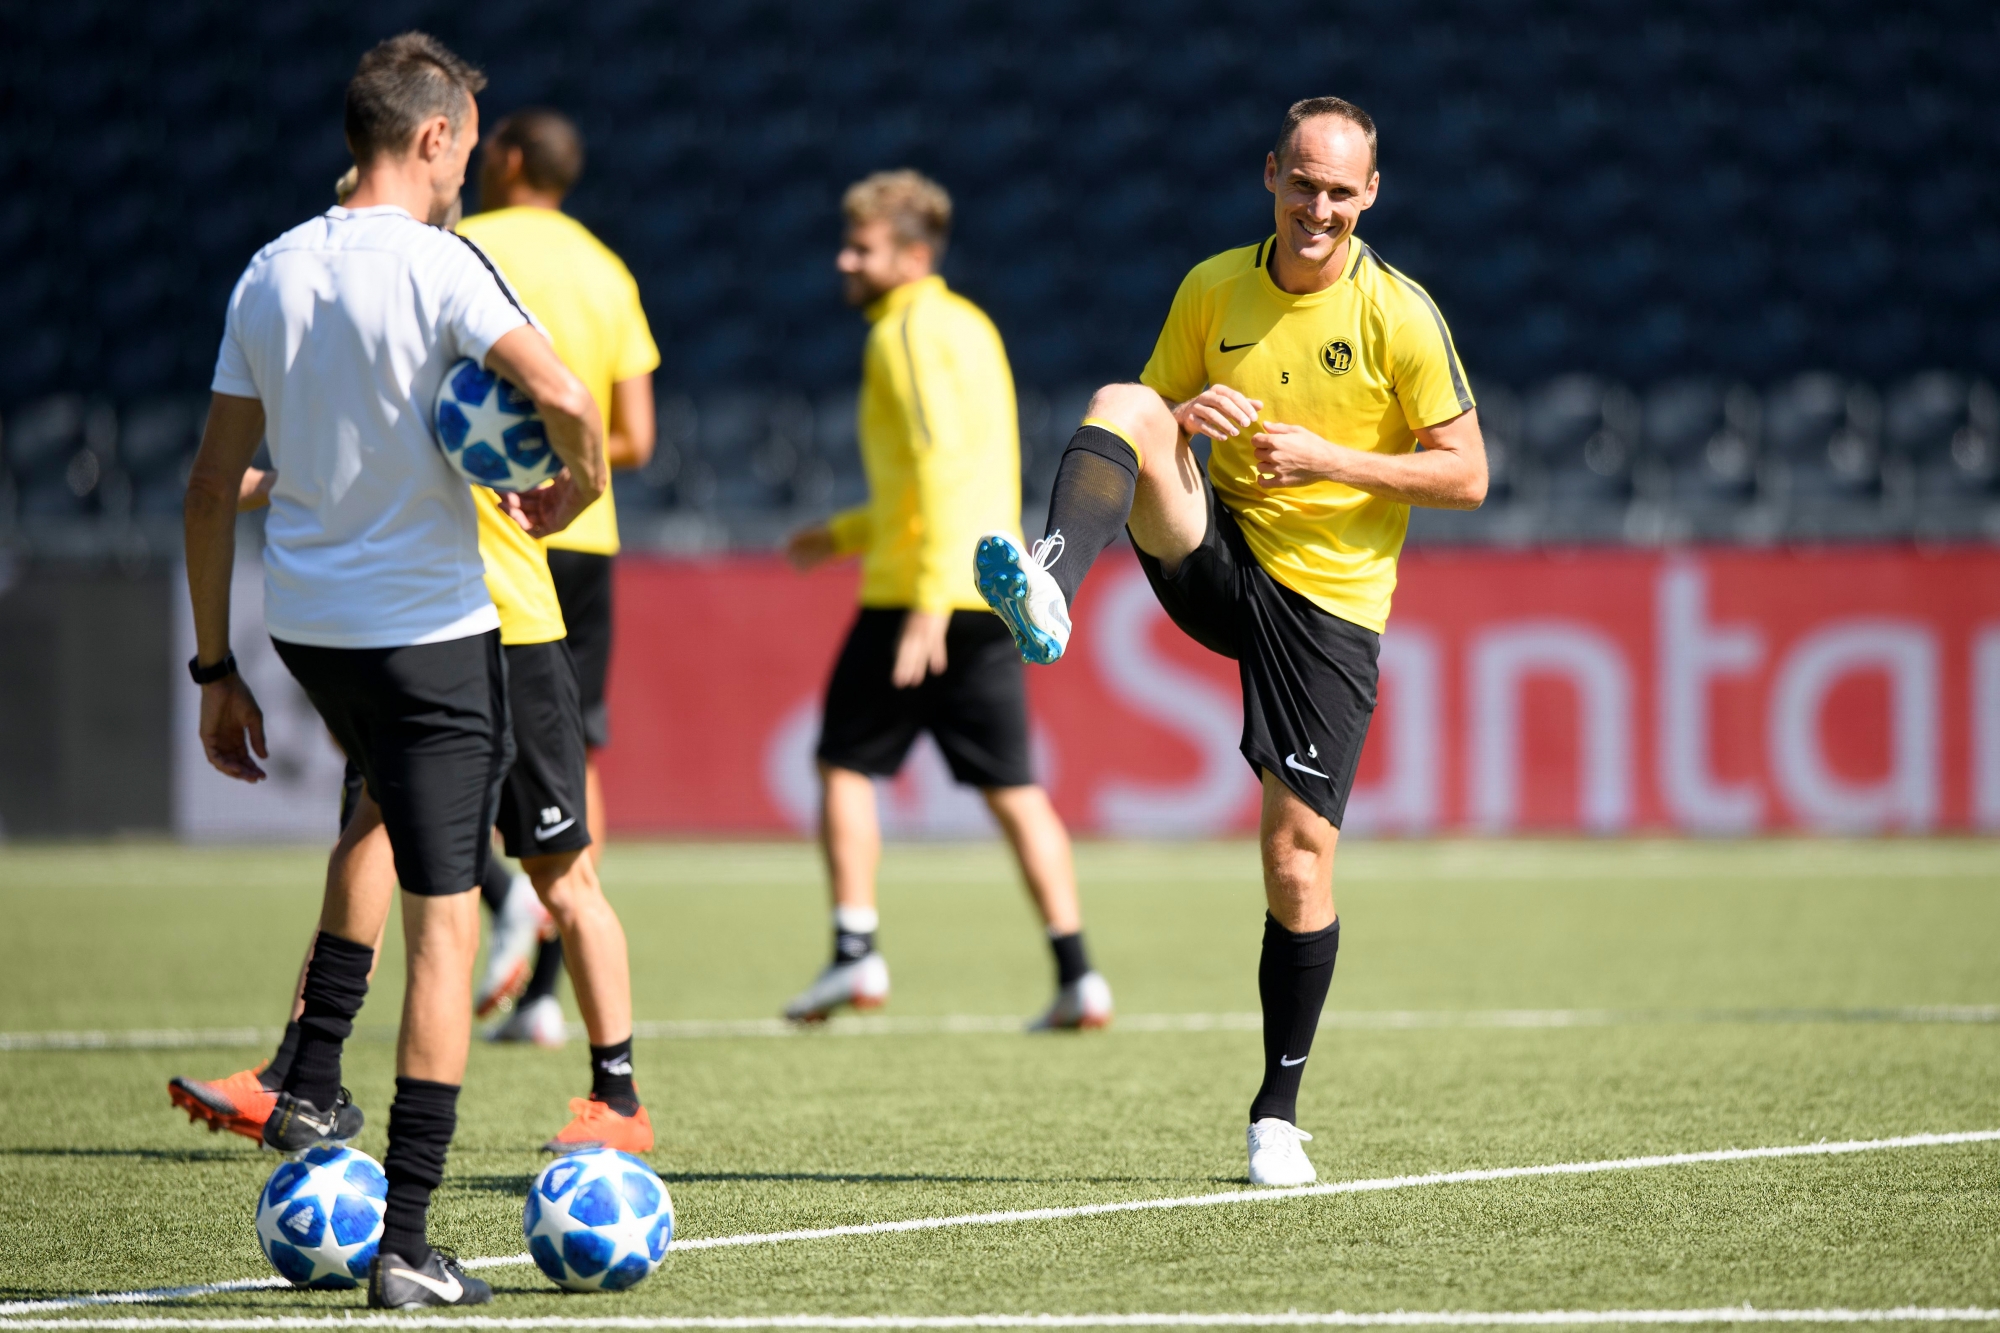 YB's Steve von Bergen in action during a training session one day prior to the UEFA Champions League playoff match between Switzerland's BSC Young Boys and Croatia's Dinamo Zagreb, in the Stade de Suisse Stadium in Bern, Switzerland, on Tuesday, August 21, 2018. (KEYSTONE/Anthony Anex) SWITZERLAND SOCCER CHAMPIONS LEAGUE YB